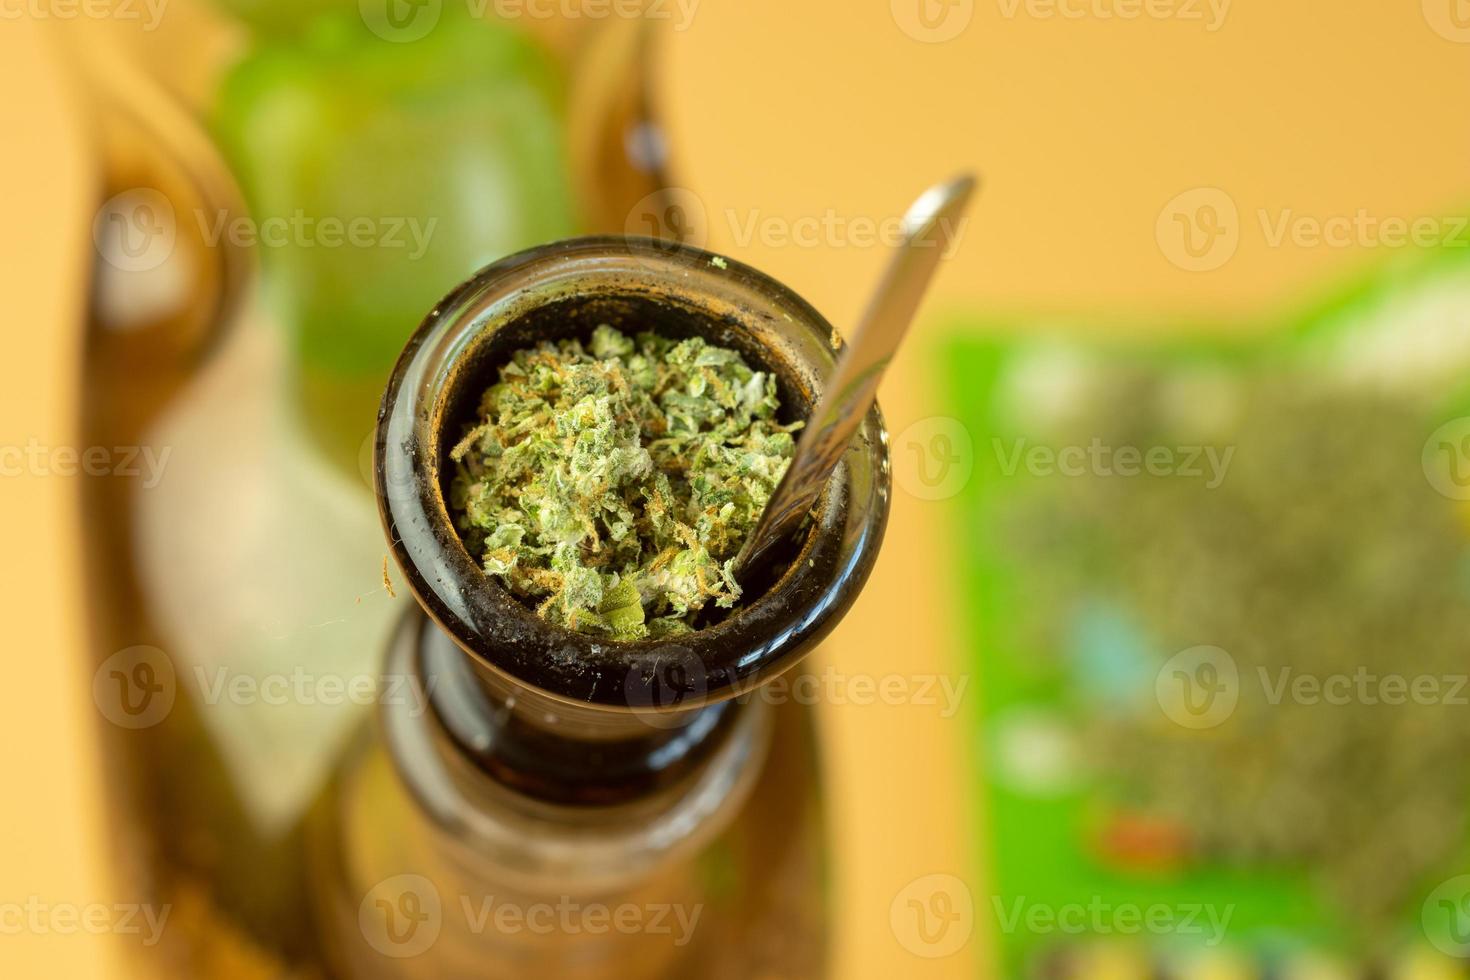 Bong filled with cannabis for recreational use. Marijuana legalize concept photo